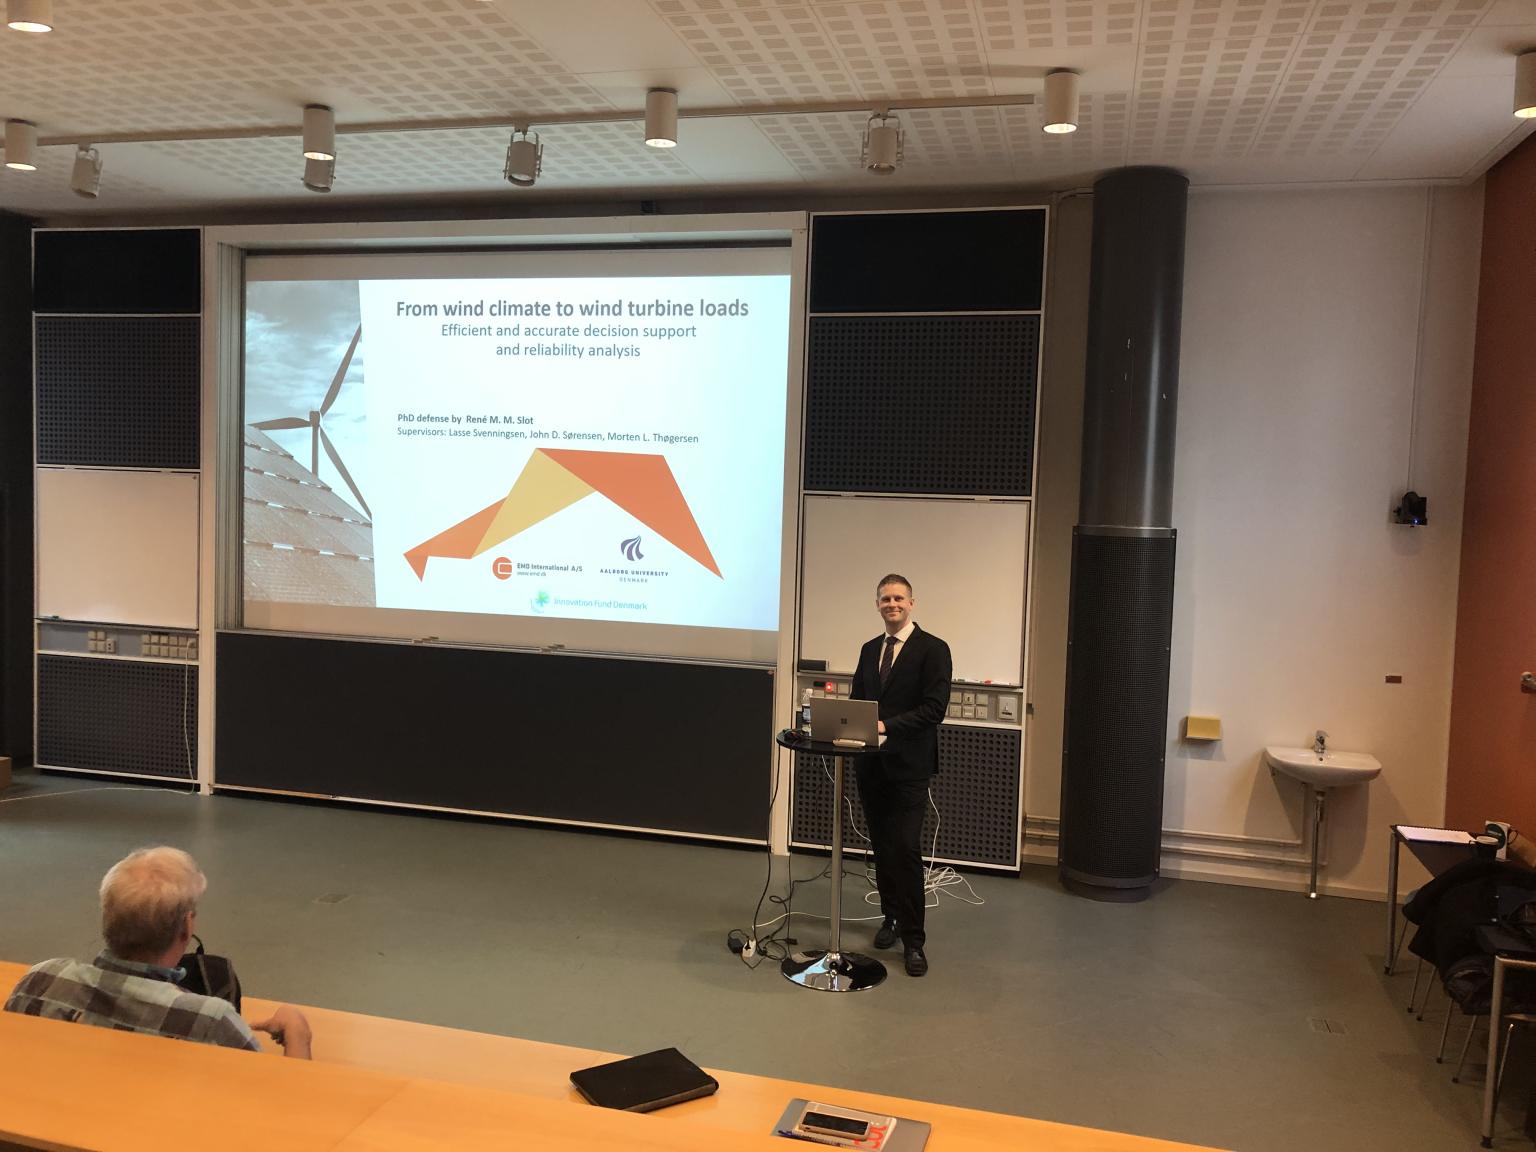 phd thesis on wind energy – Forums